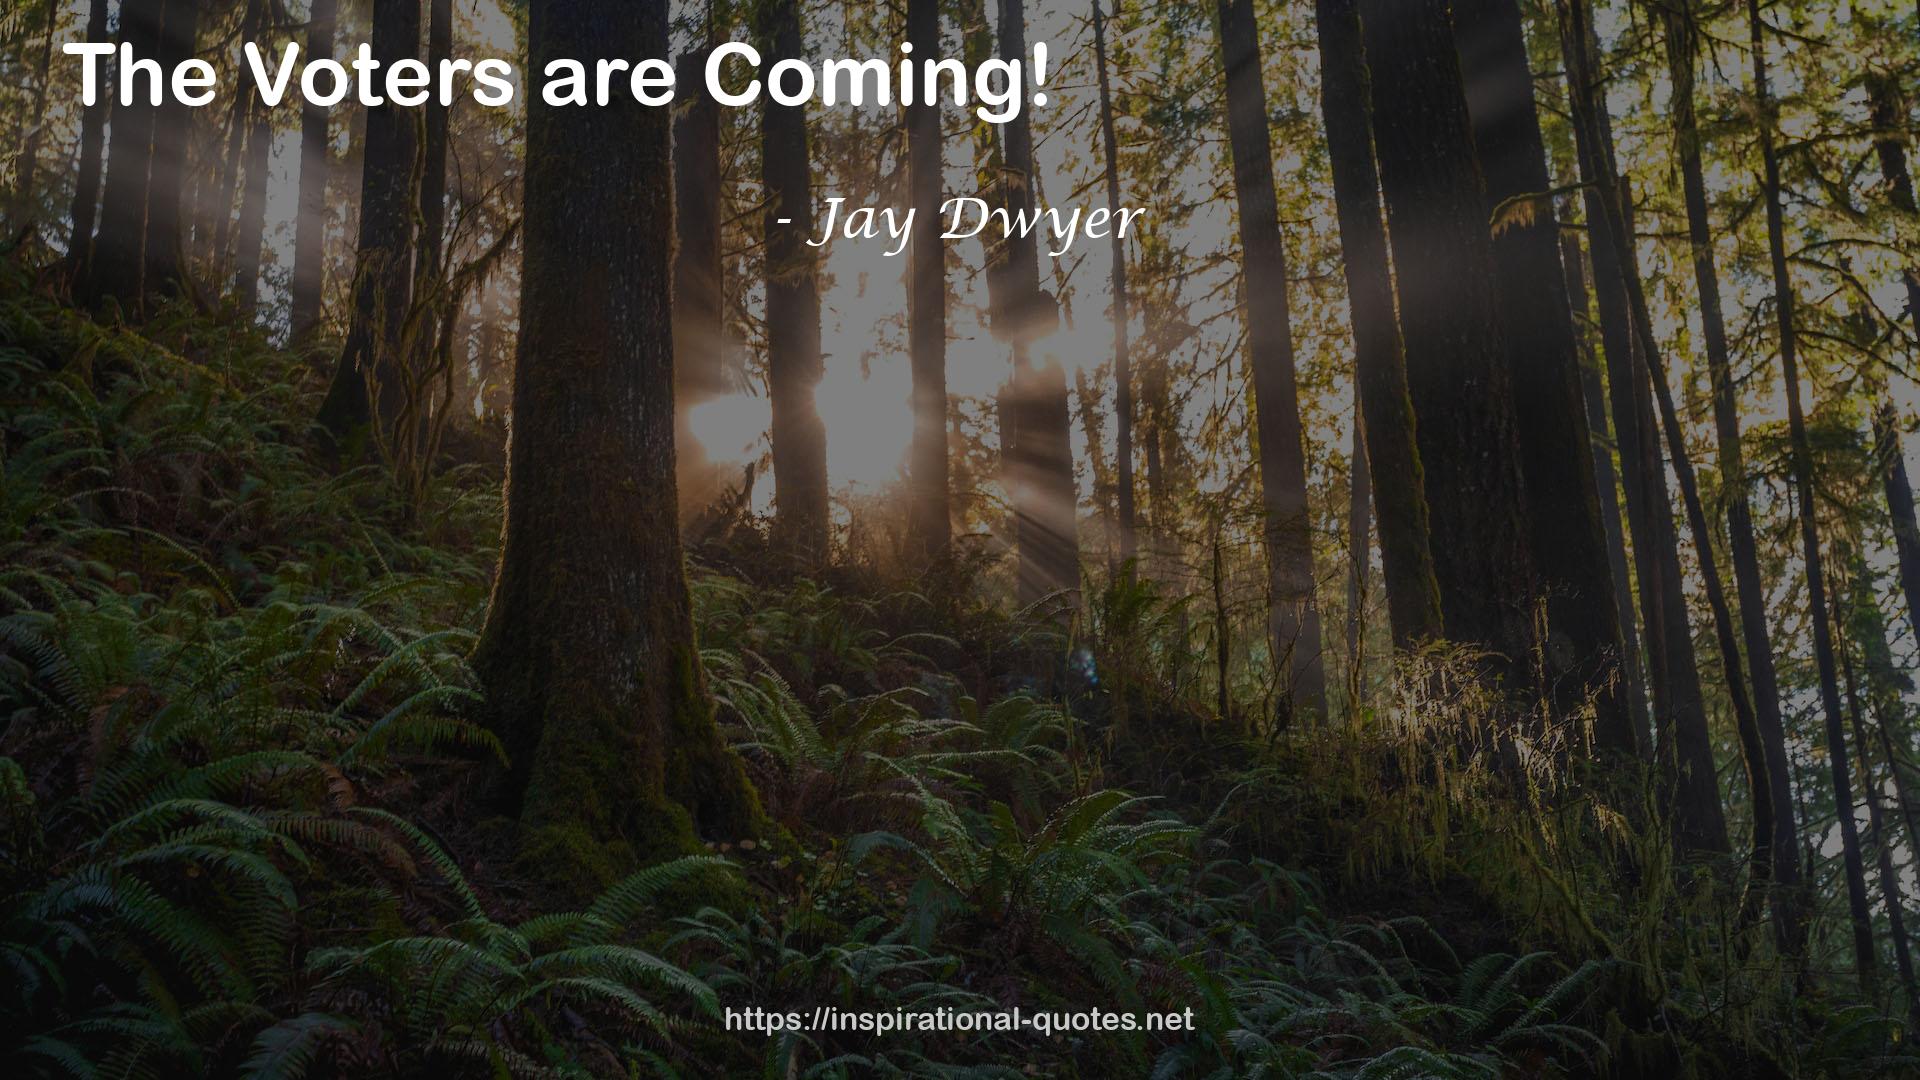 Jay Dwyer QUOTES